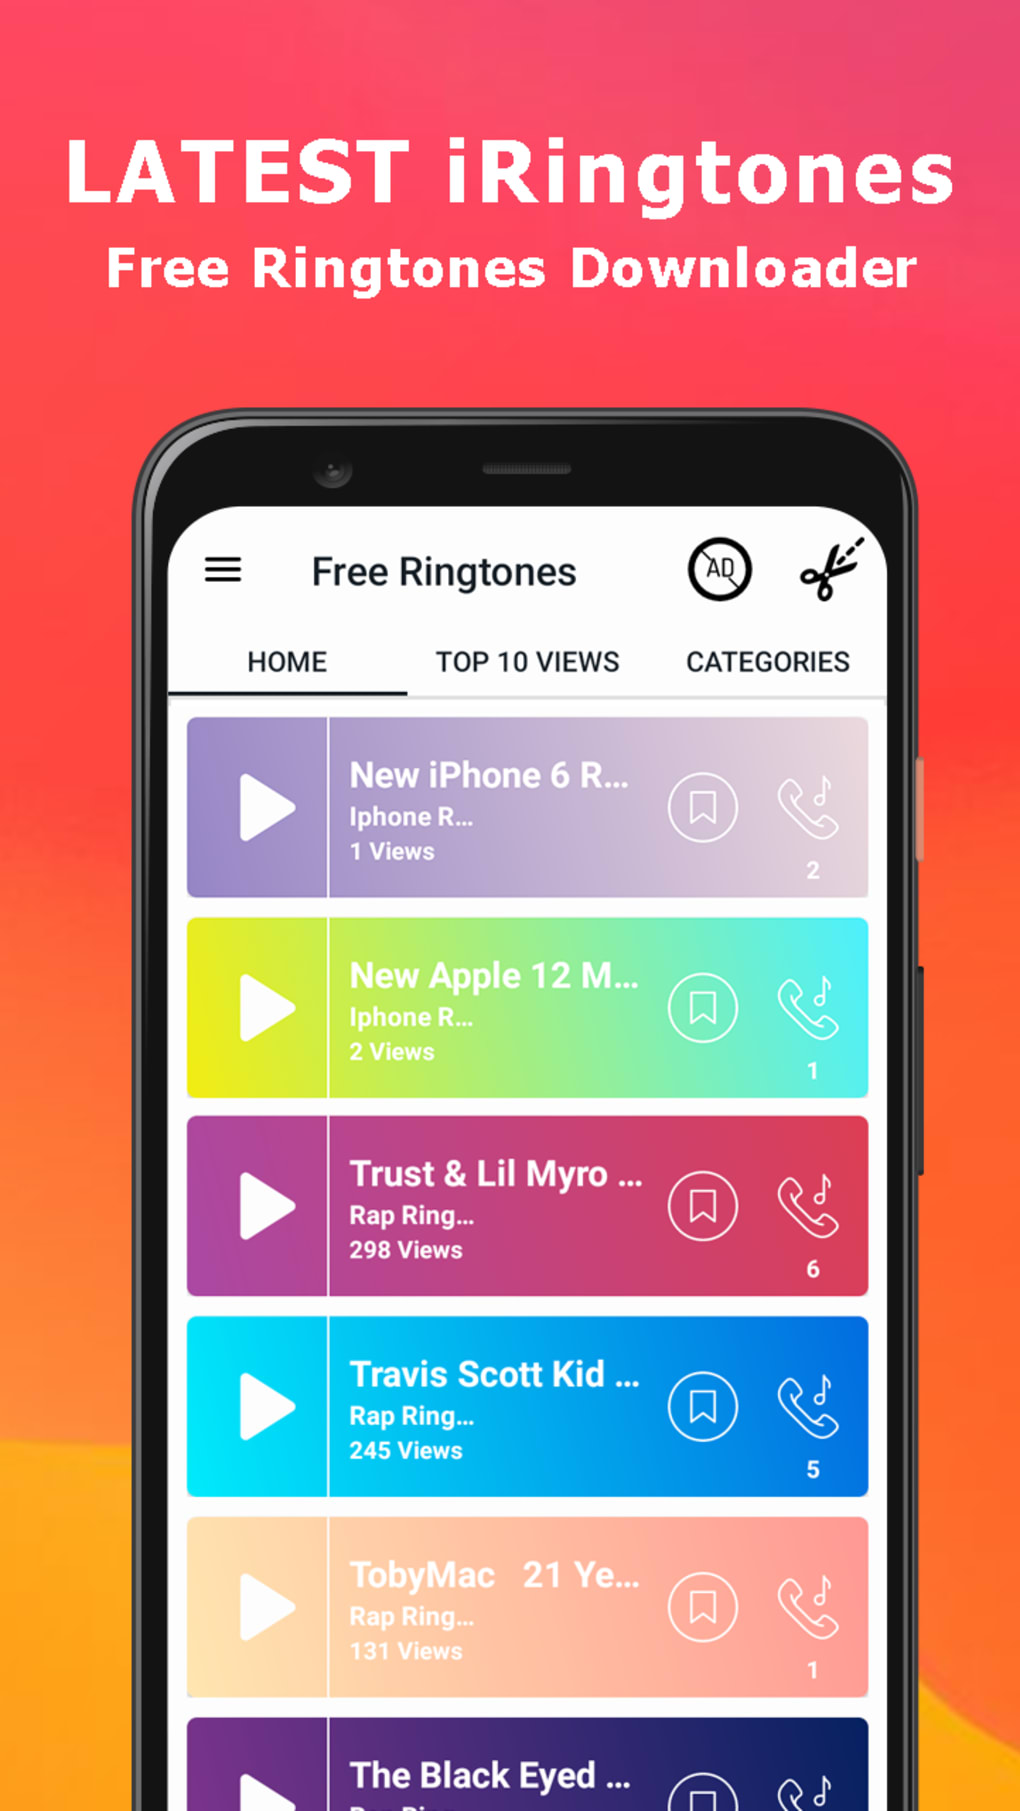 16 Best Free Ringtones for Android ideas | ringtones for android, best  ringtones, free ringtones